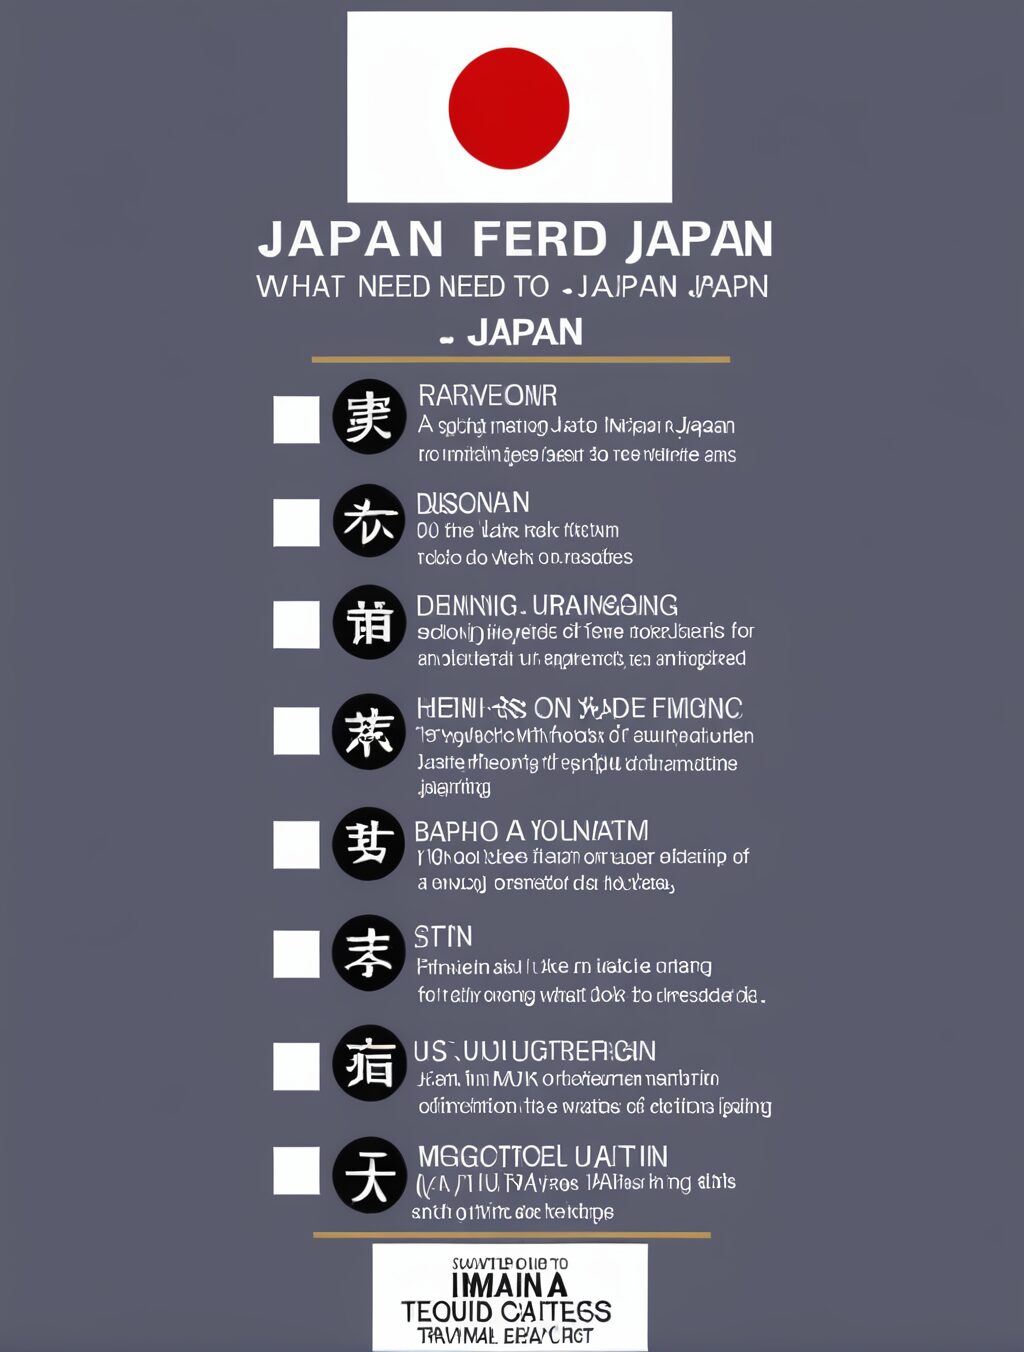 what do i need to take a trip to japan